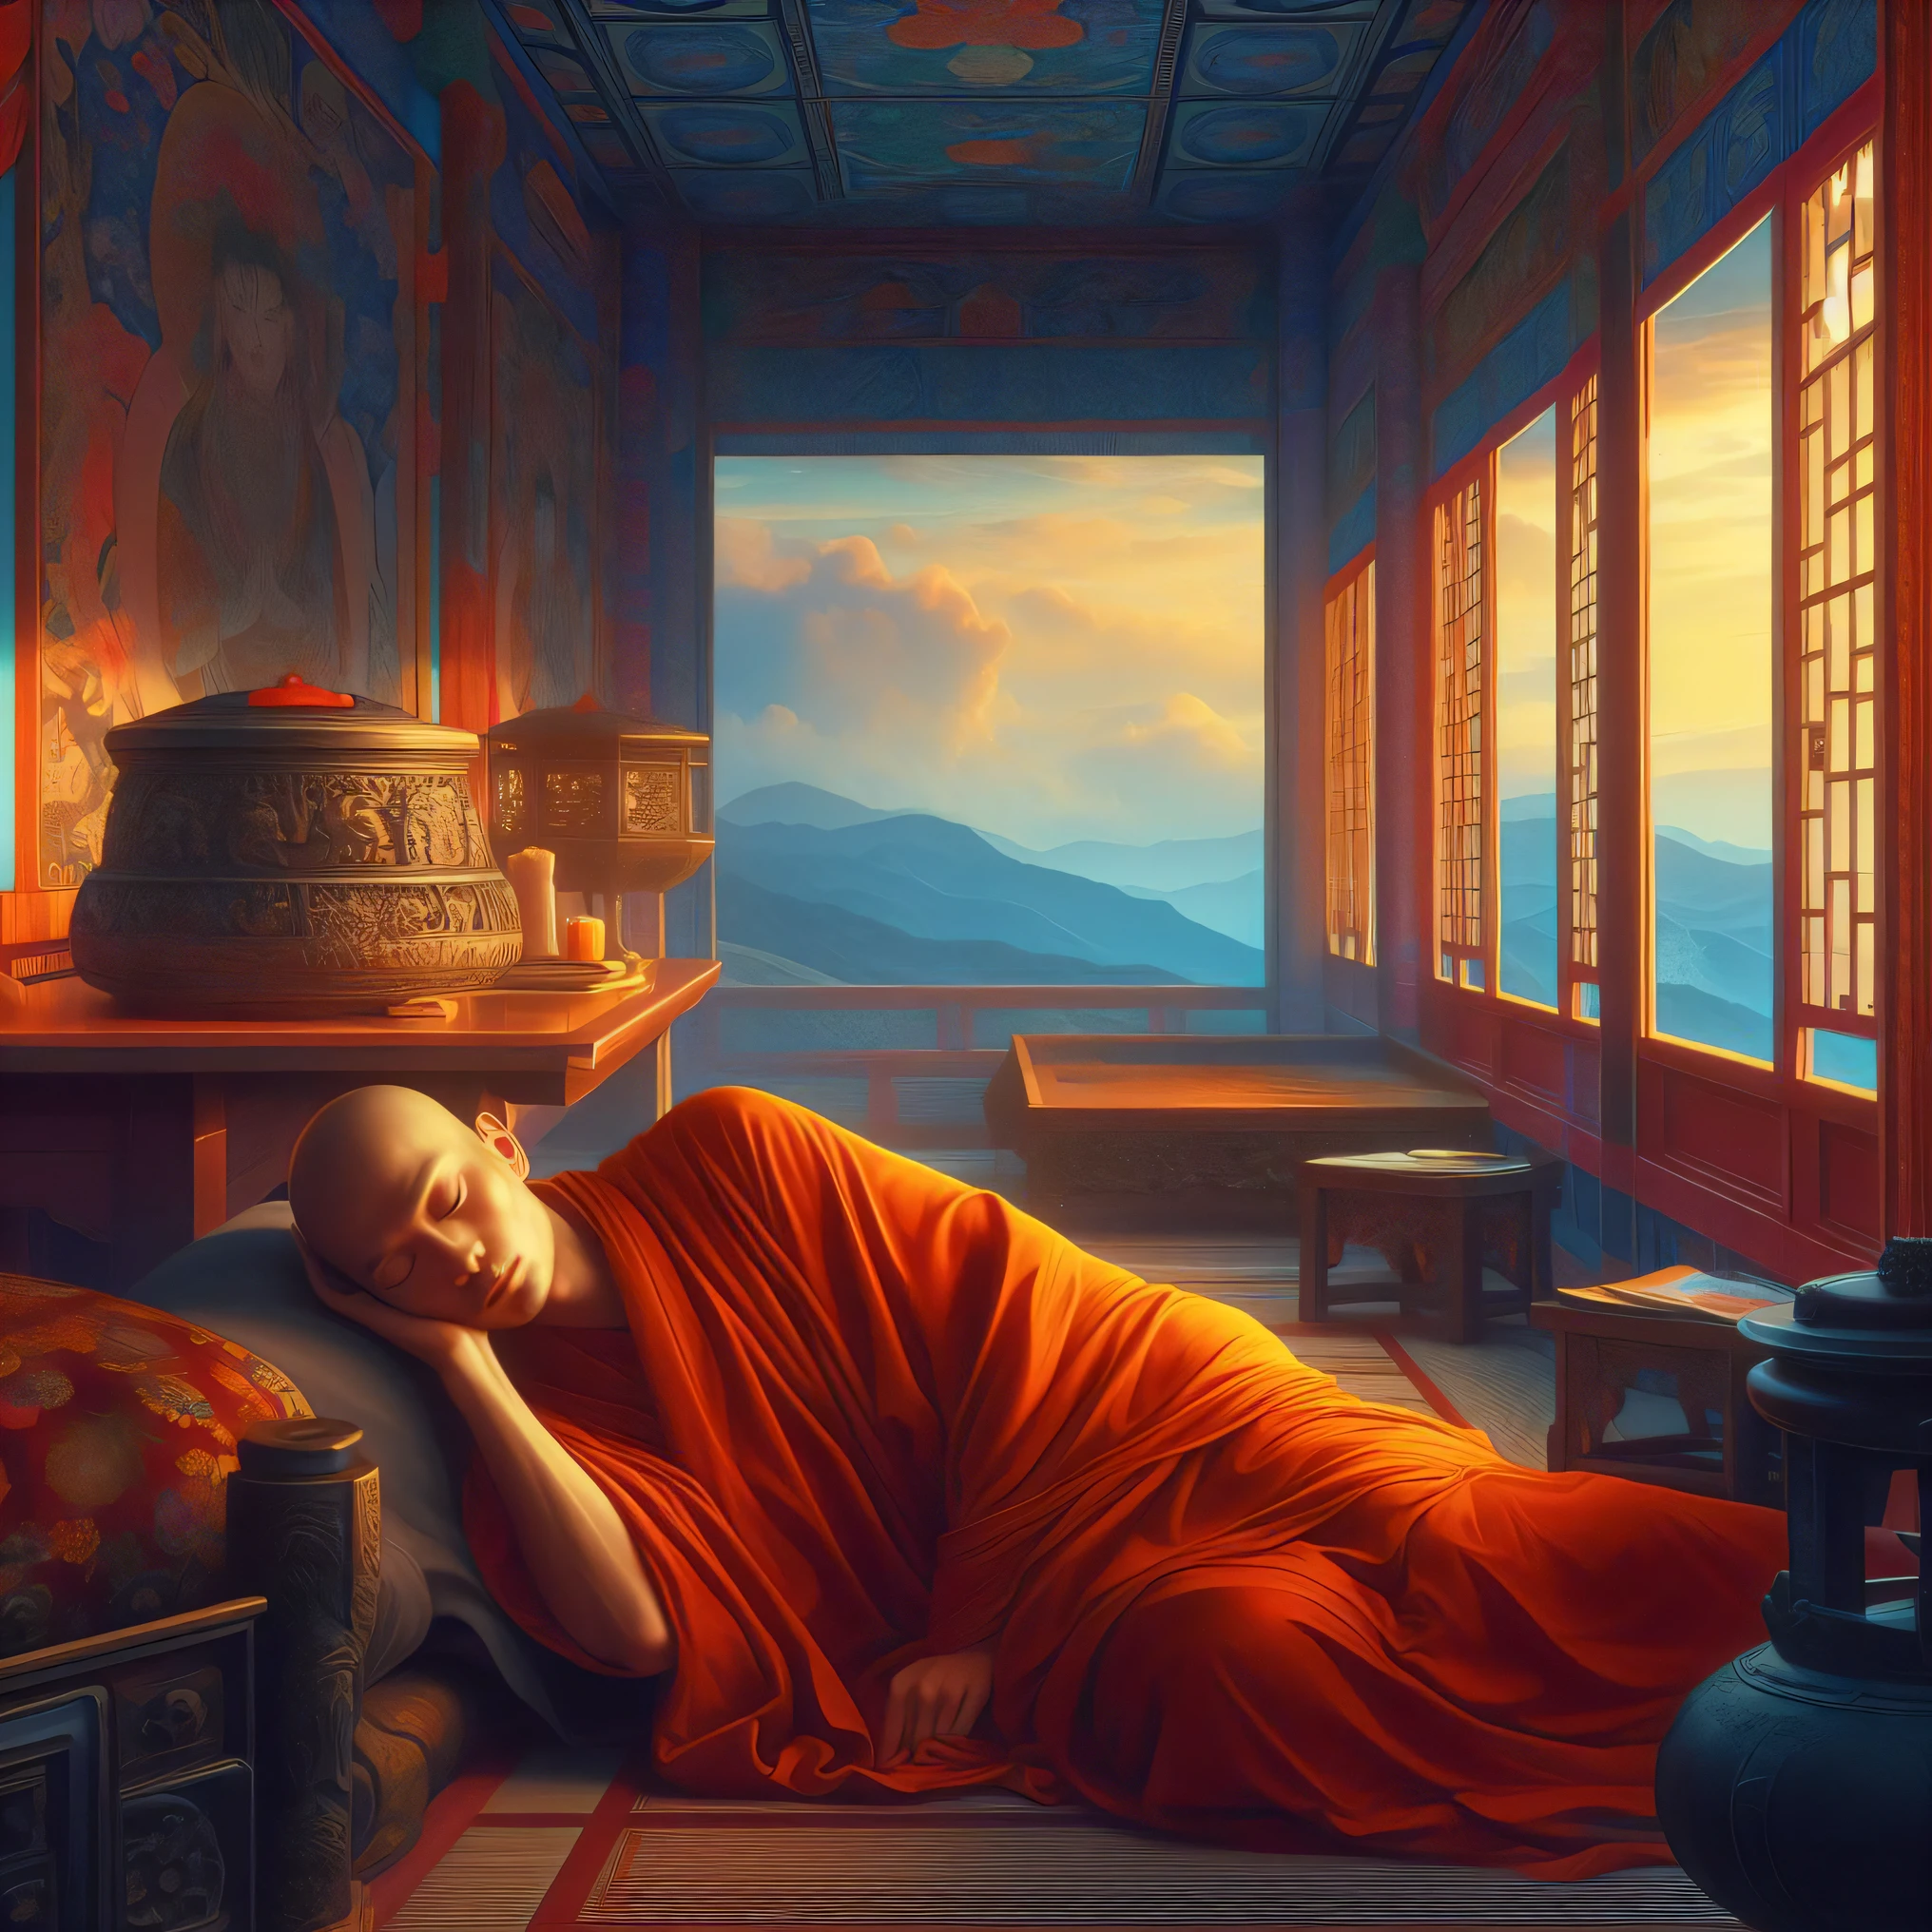 painting of a monk sleeping in a room with a view of mountains, monk meditate, buddhist monk meditating, by RHADS, concept art | rhads, inspired by Mike Winkelmann, epic surrealism 8k oil painting, by Mike Winkelmann, buddhist monk, marc adamus, yuri shwedoff and tom bagshaw, portrait of monk